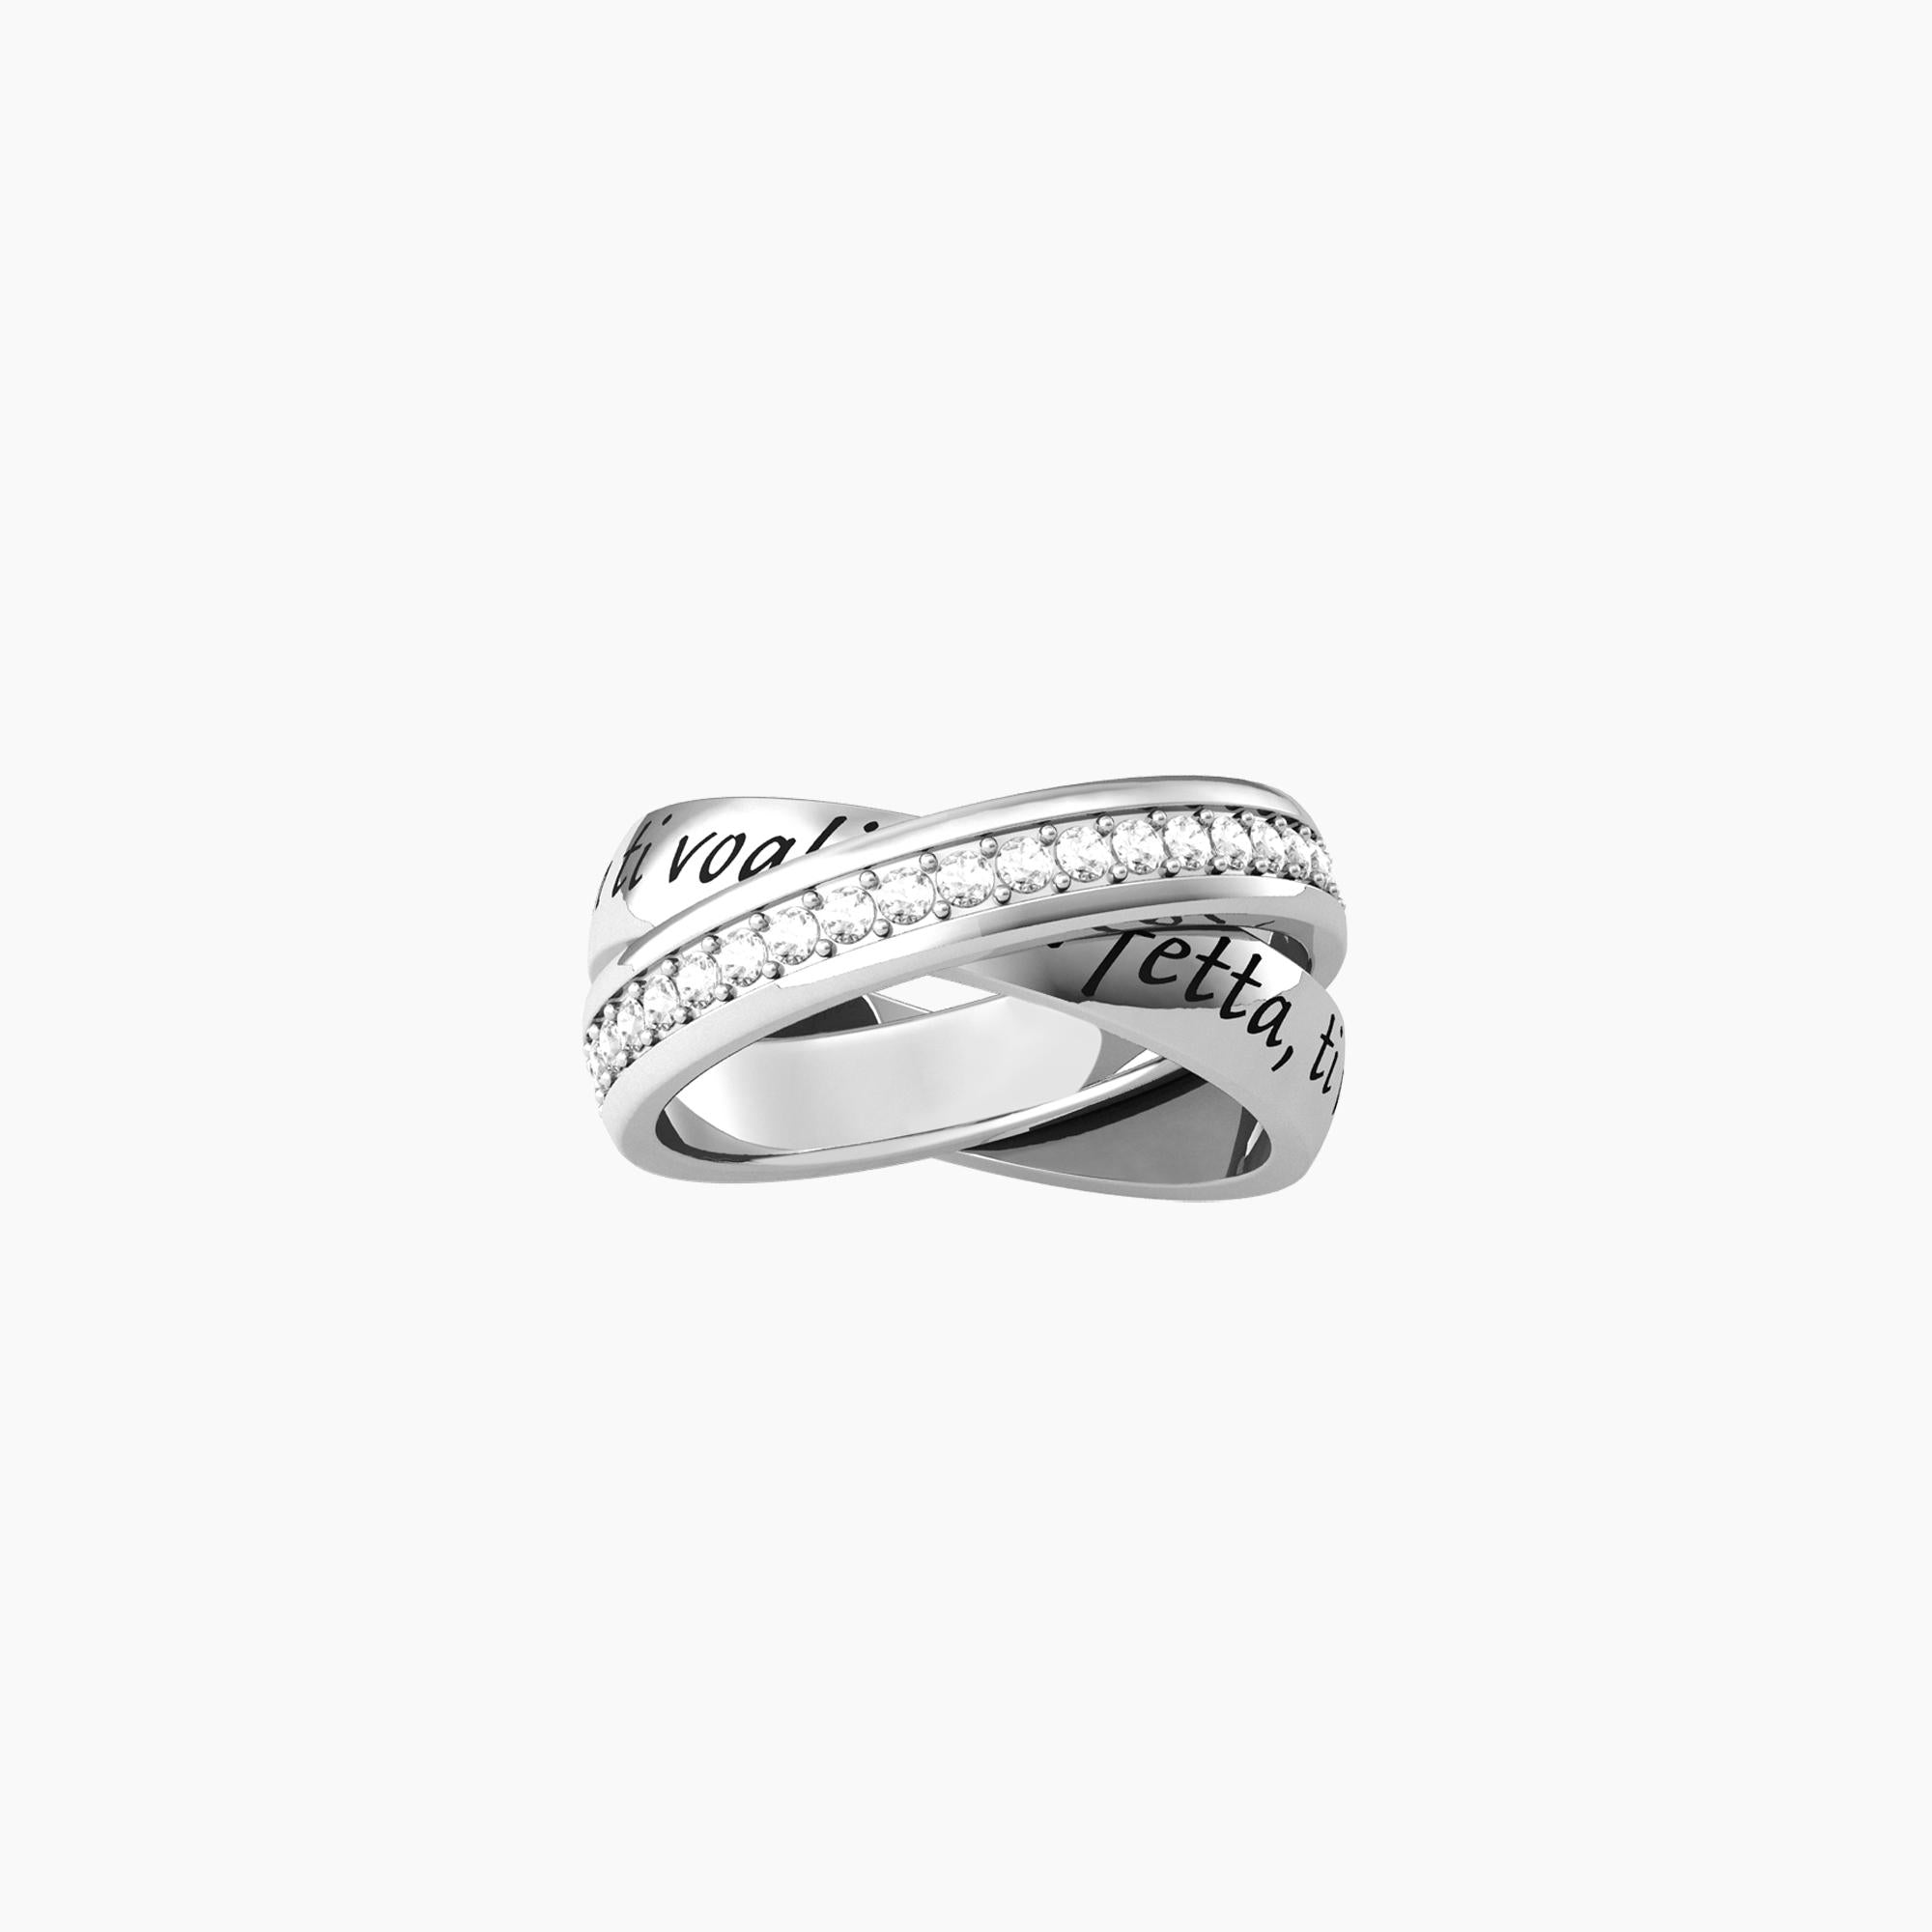 Mum ring woven with crystals and phrase
 MOM | HAPPINESS - 721006